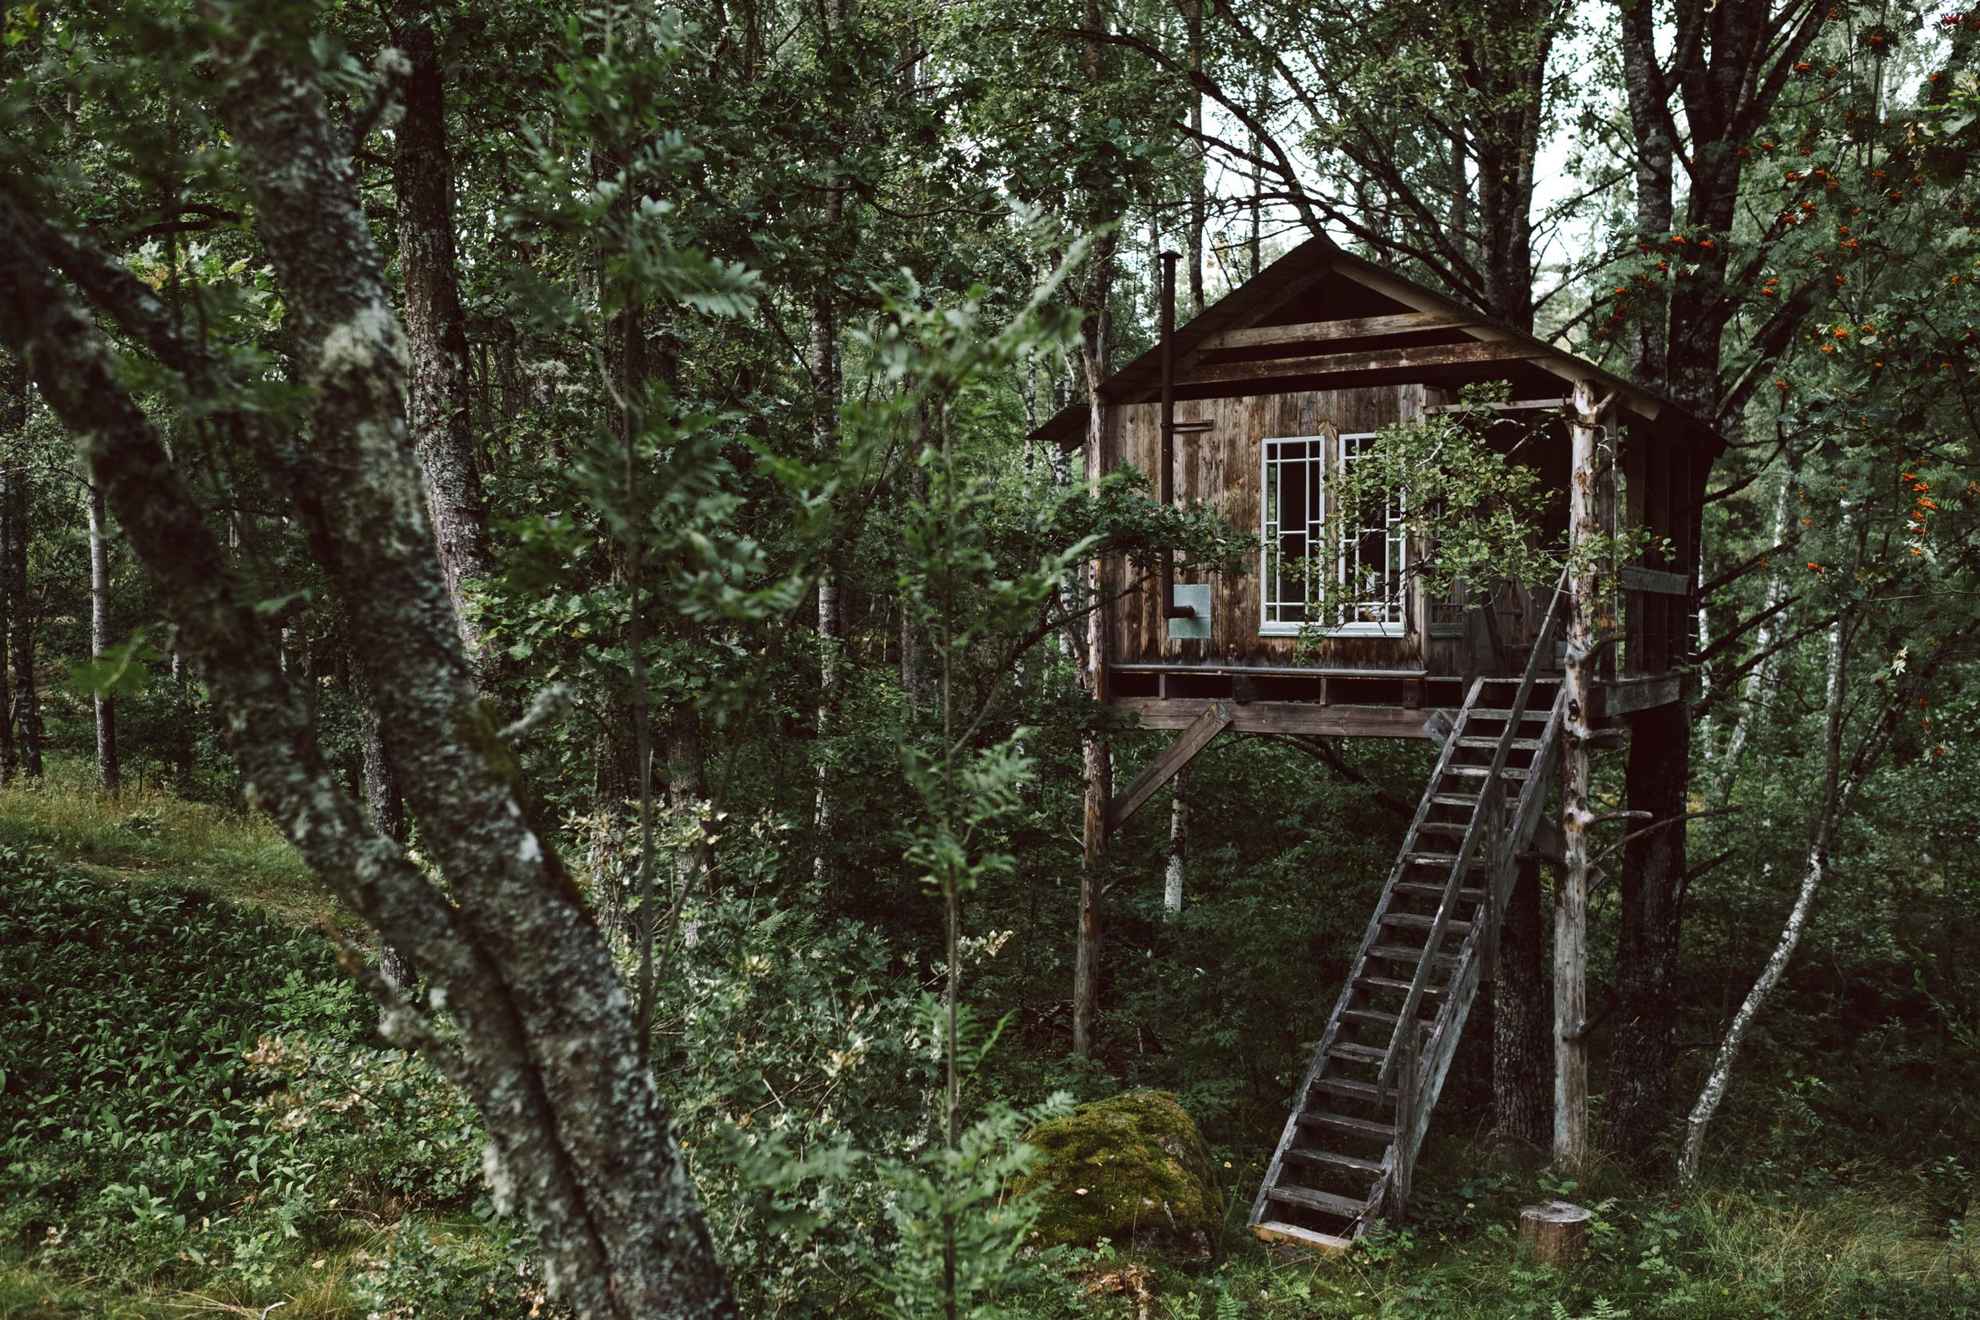 A wooden tree house surrounded by trees during summer.